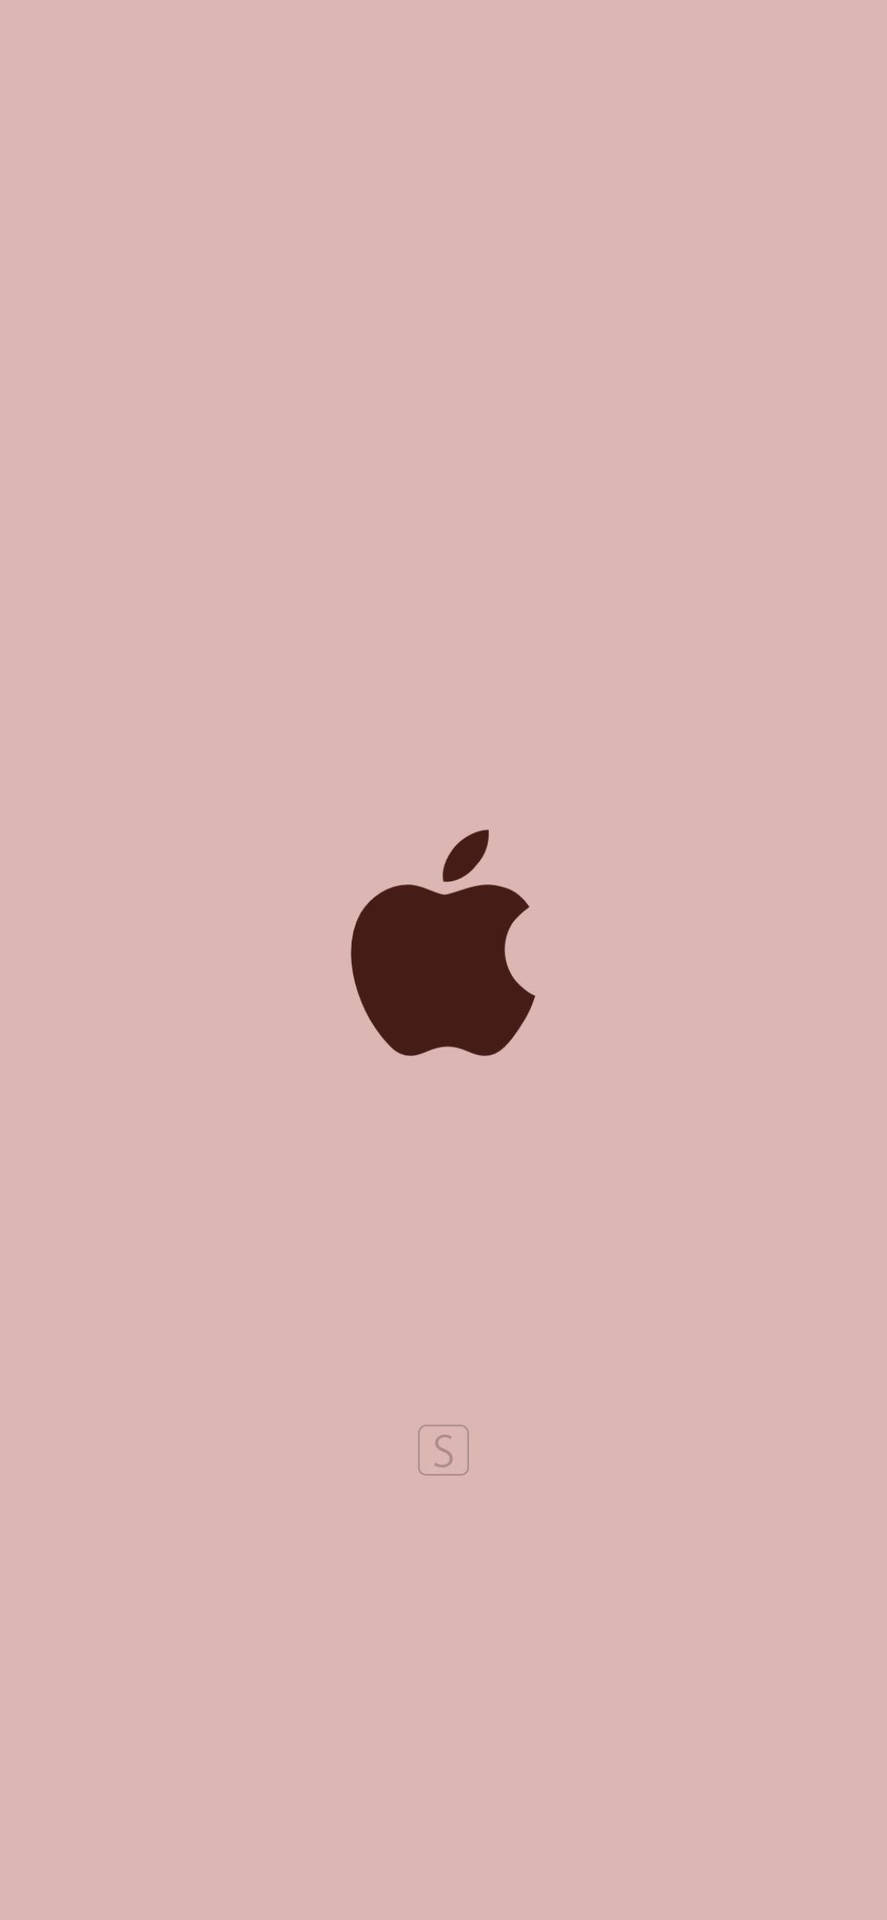 Rose Gold Ipad Apple Logo And S Background